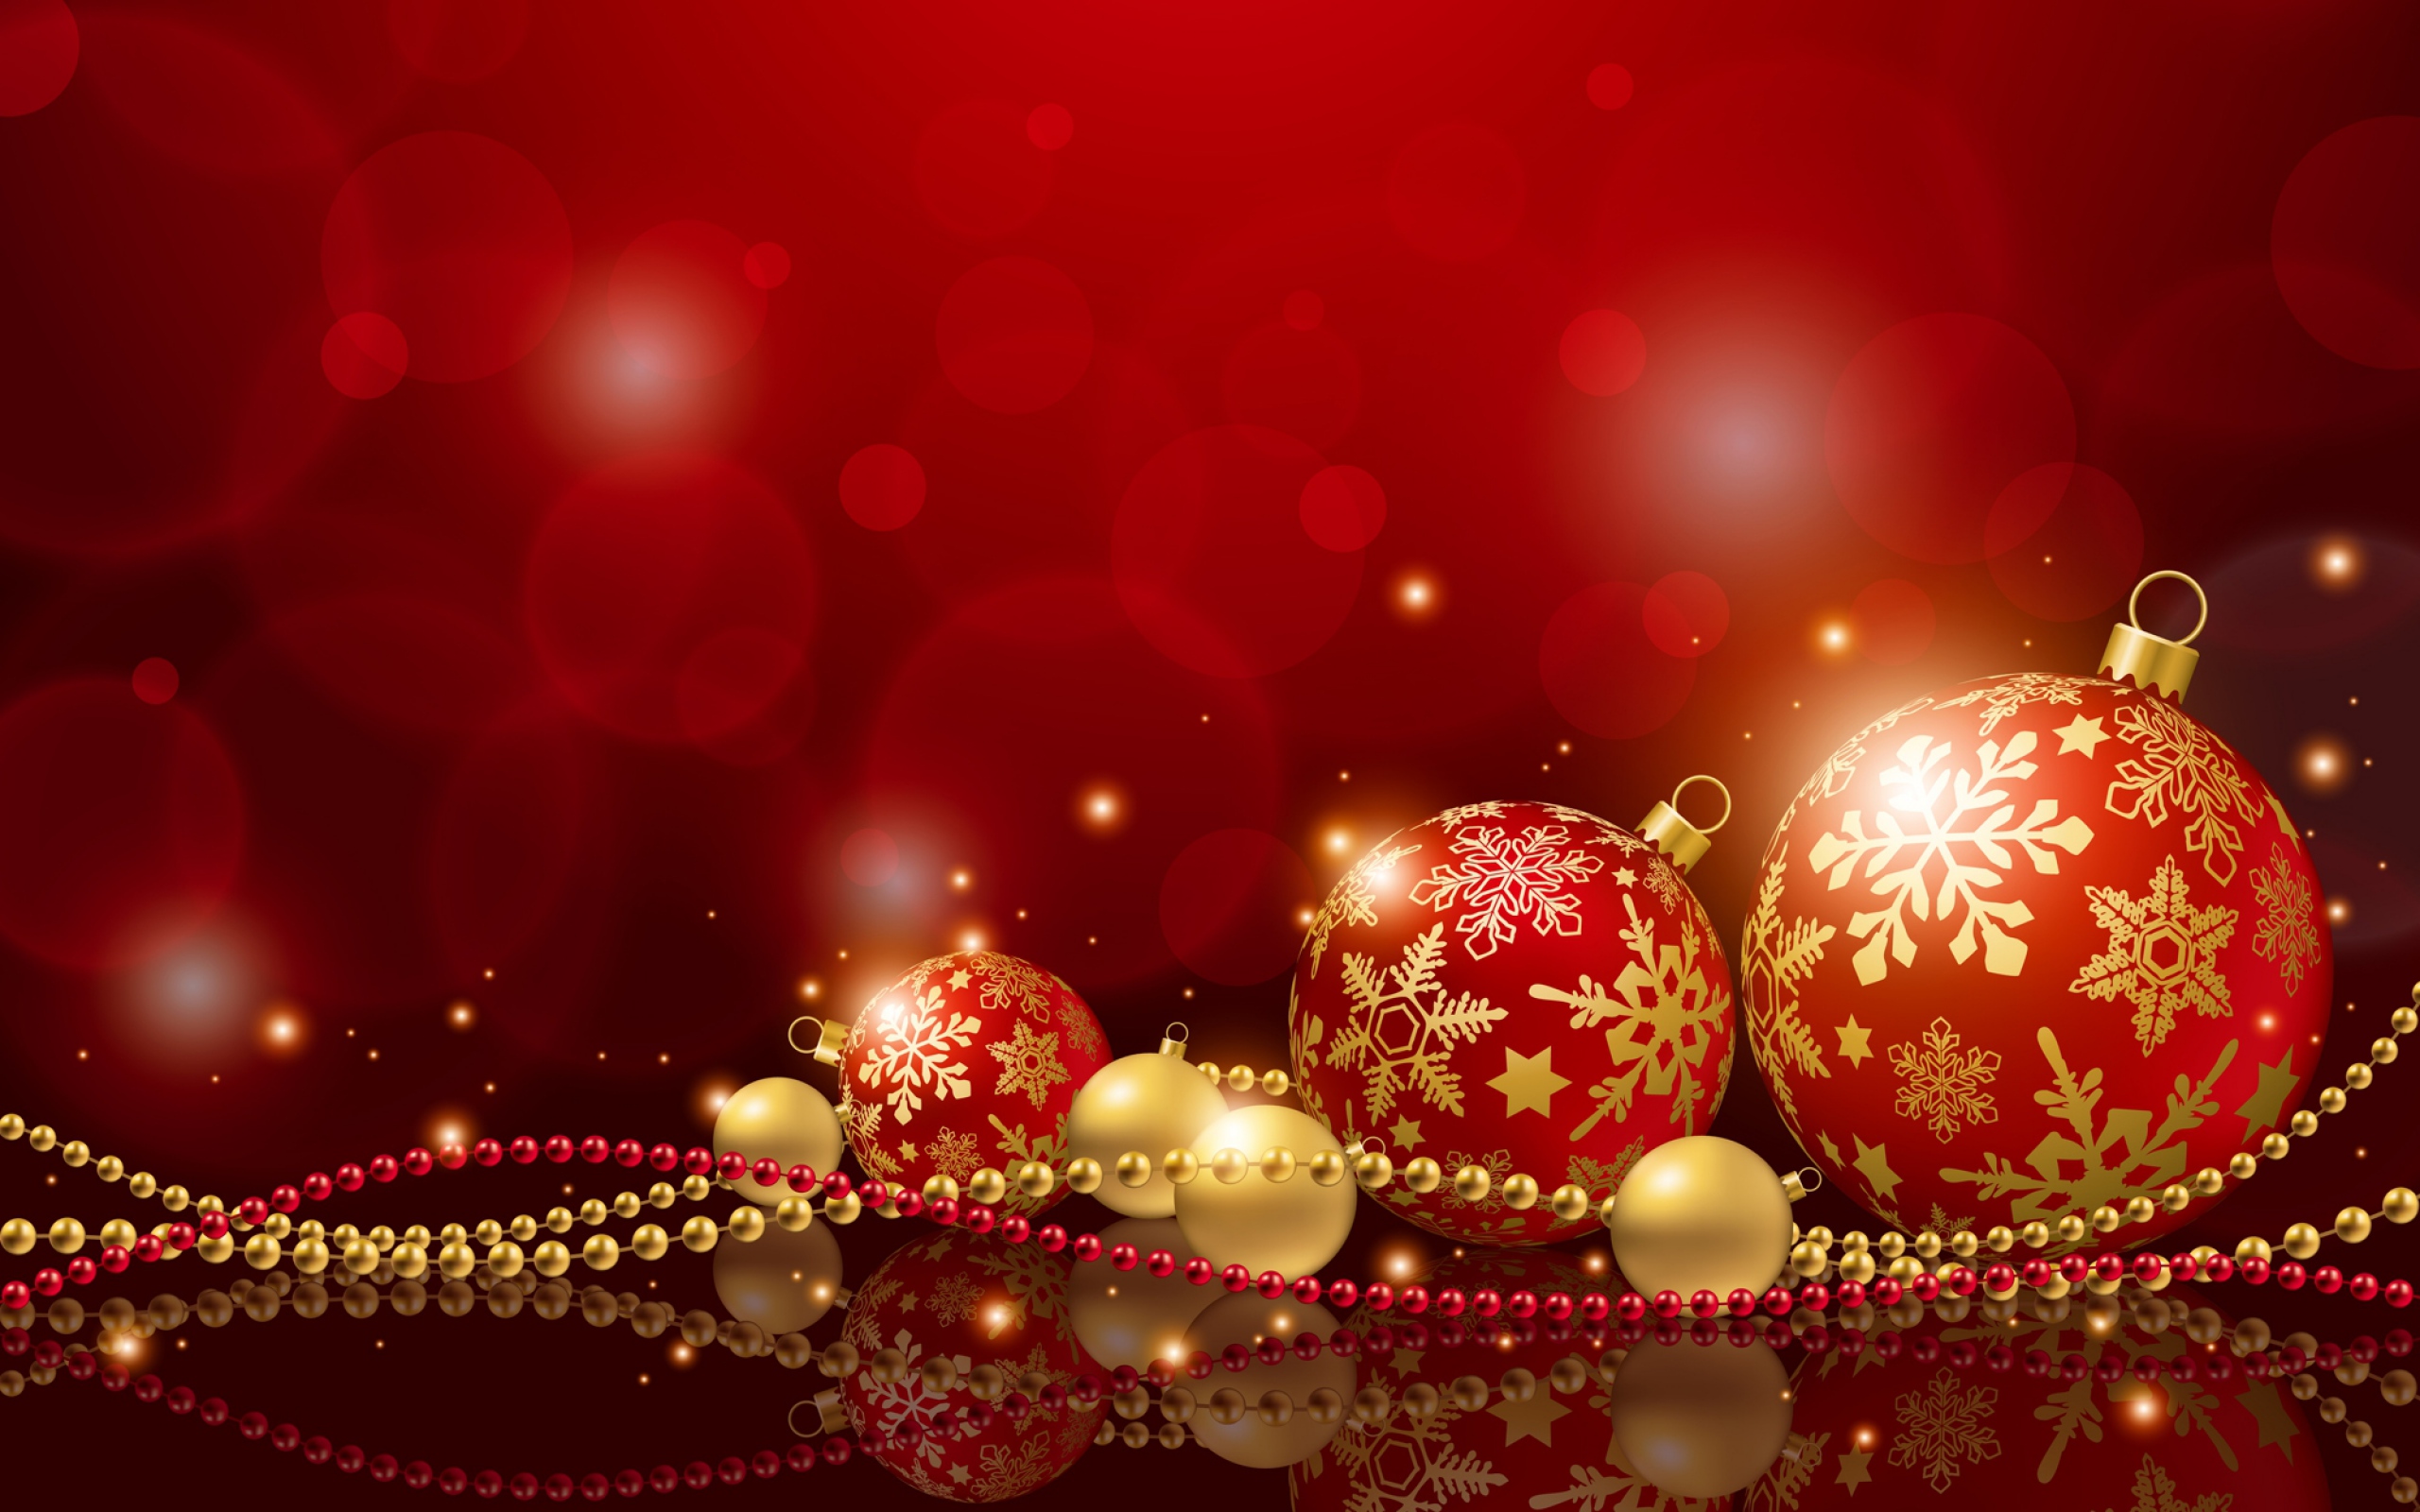 Christmas holiday wallpaper backgrounds